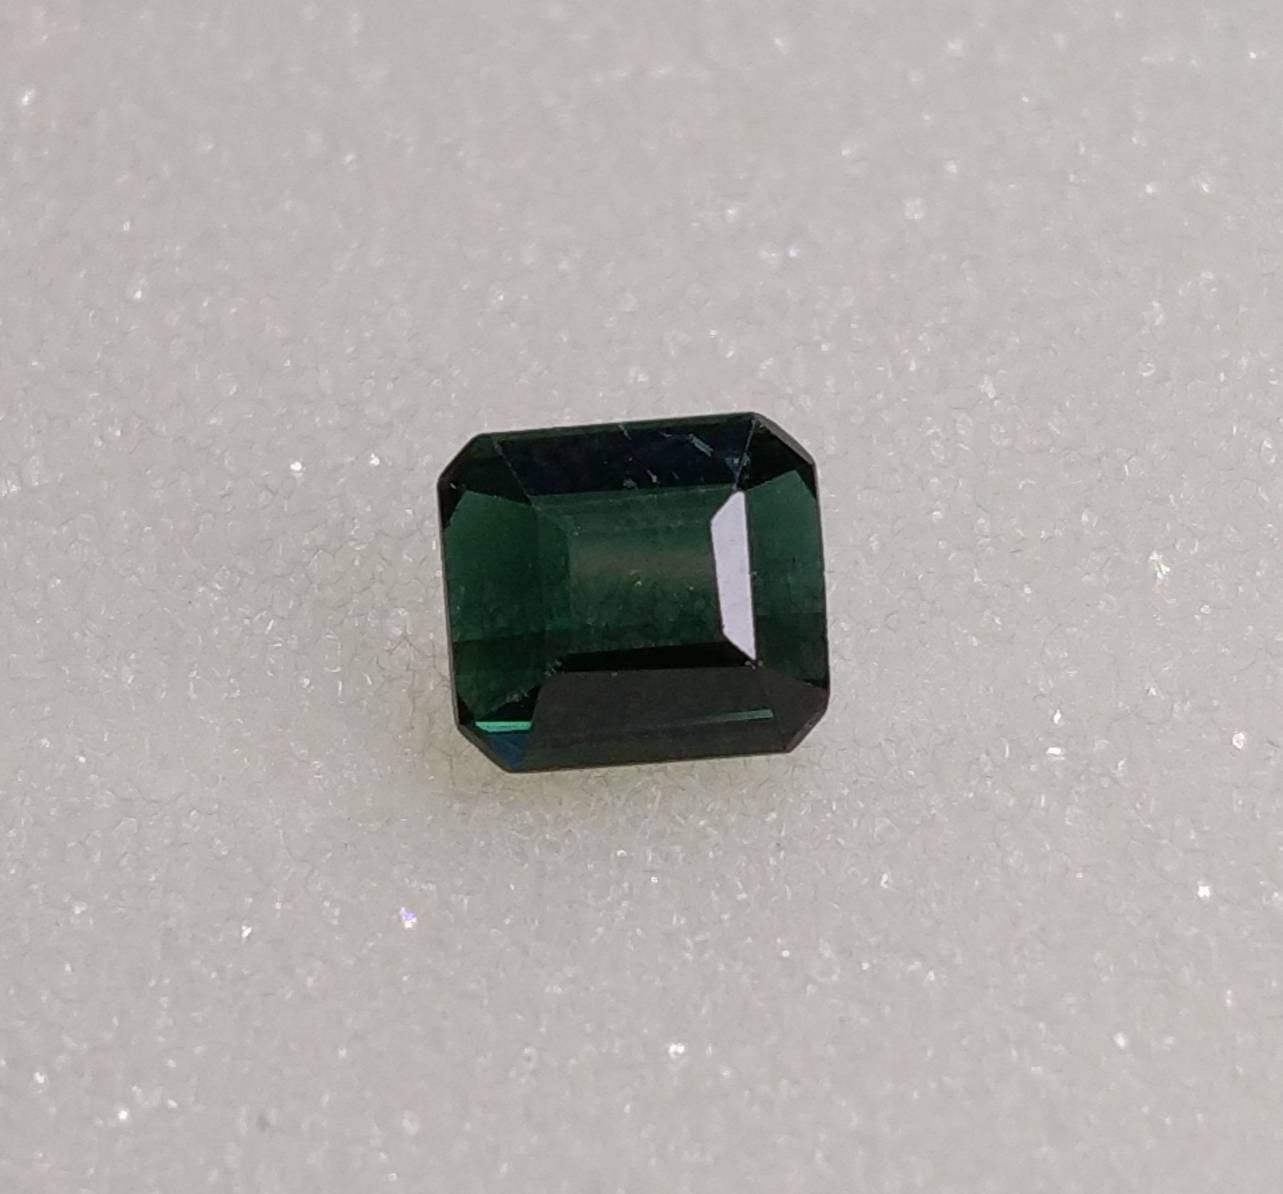 ARSAA GEMS AND MINERALSNatural top quality beautiful 2 carat radiant shape faceted Blue Tourmaline gem - Premium  from ARSAA GEMS AND MINERALS - Just $18.00! Shop now at ARSAA GEMS AND MINERALS